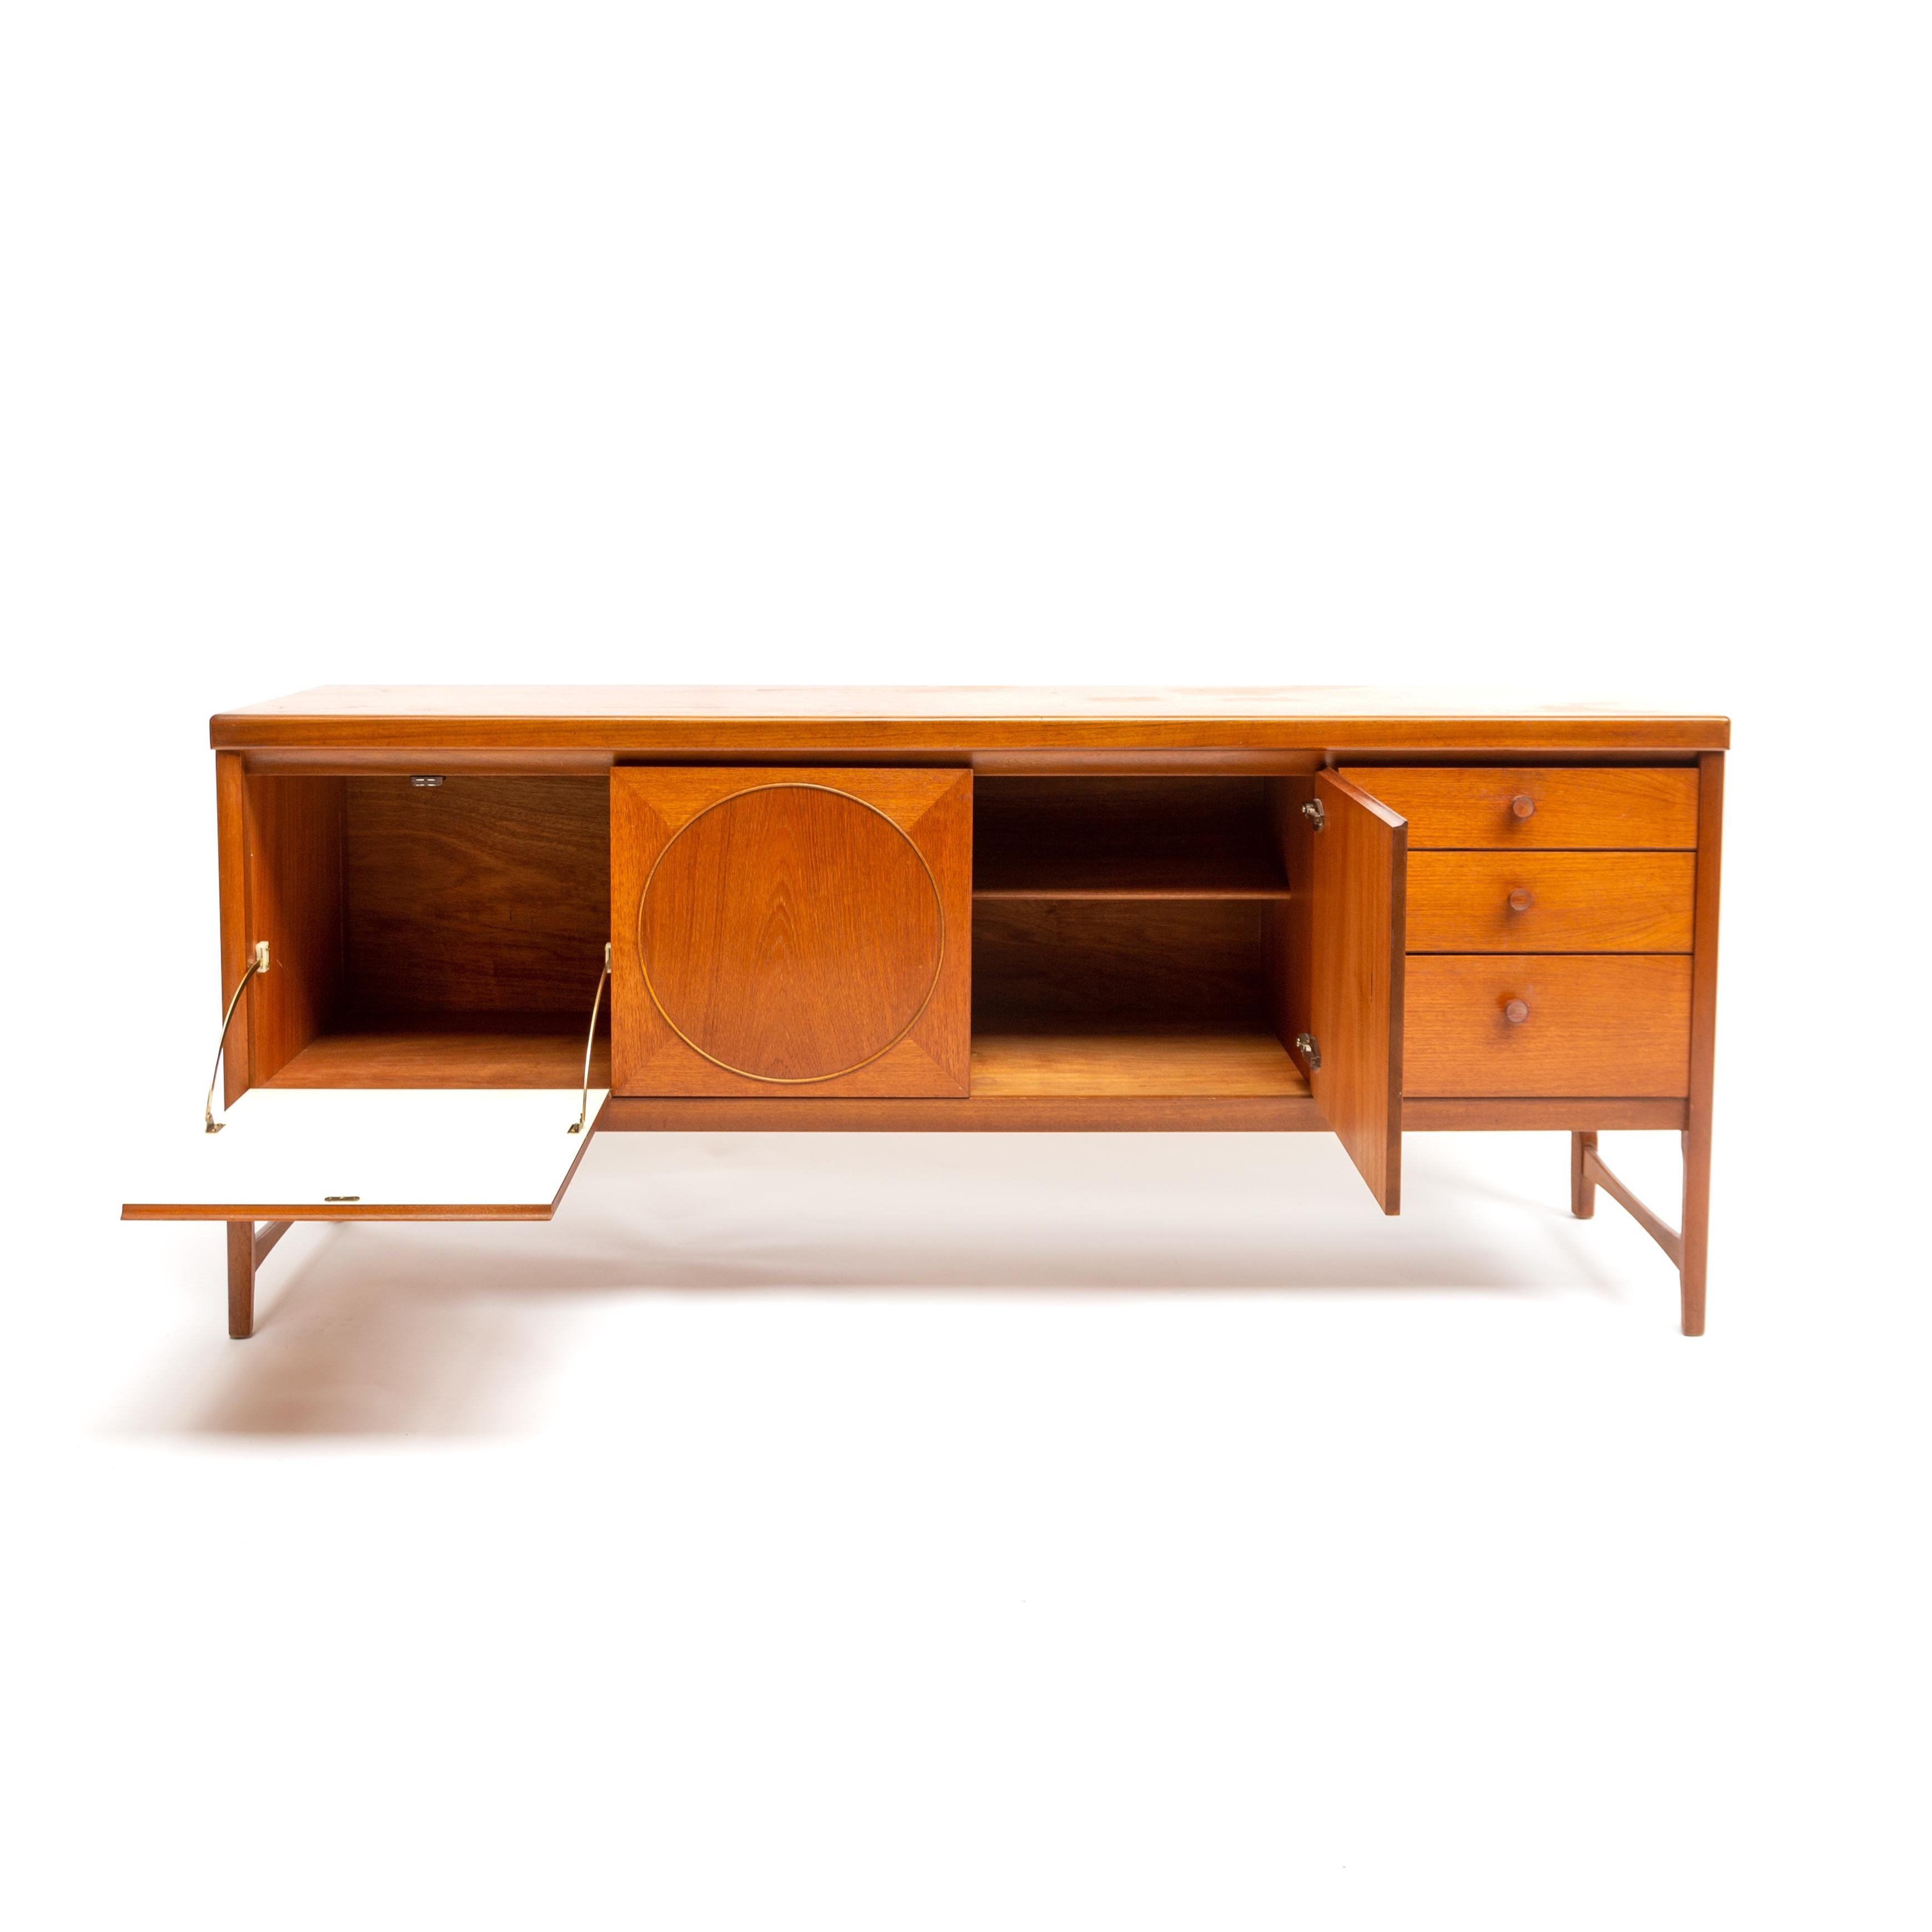 Very beautiful original teak sideboard, dresser or credenza. Made in the UK by Nathan Furniture and designed by Patrick Lee. 
A superb Nathan ‘circles’ sideboard. It is in very good condition with very minor signs of expected wear. The drawers are